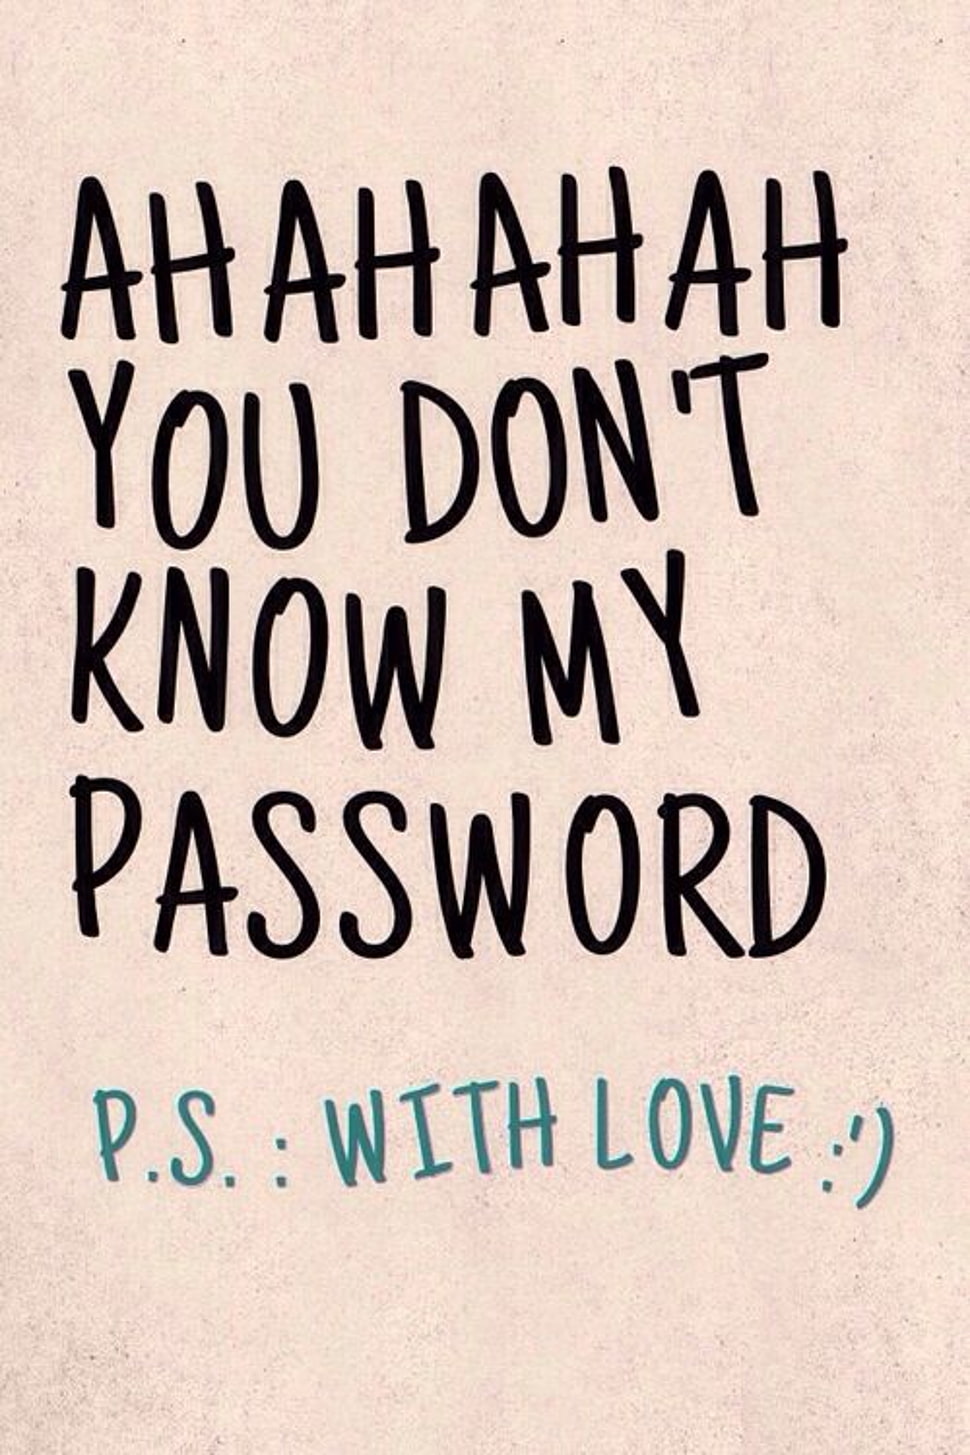 You Don't Know My Password Text Hd Wallpaper - Iphone X Wallpaper Funny Quotes , HD Wallpaper & Backgrounds